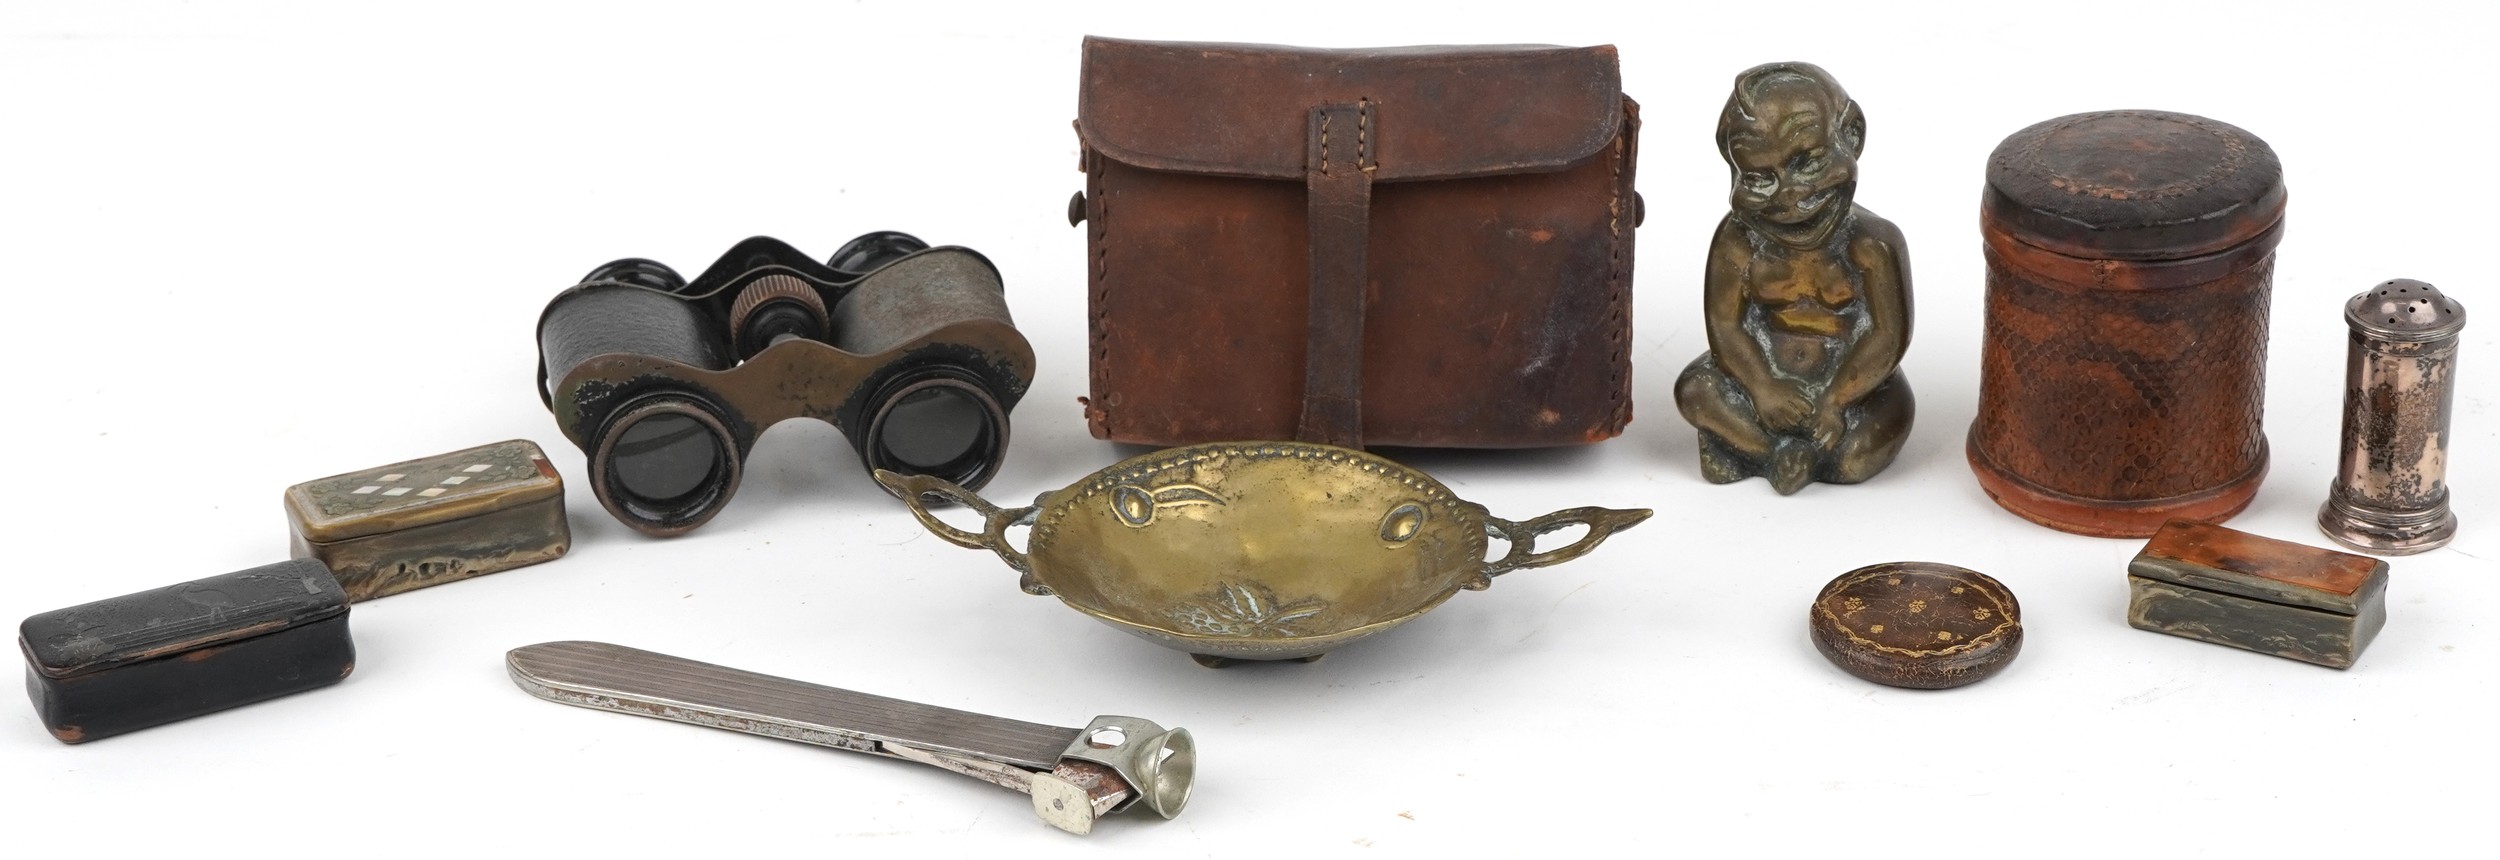 19th century and later sundry items including silver mounted cigar cutter, silver caster, three